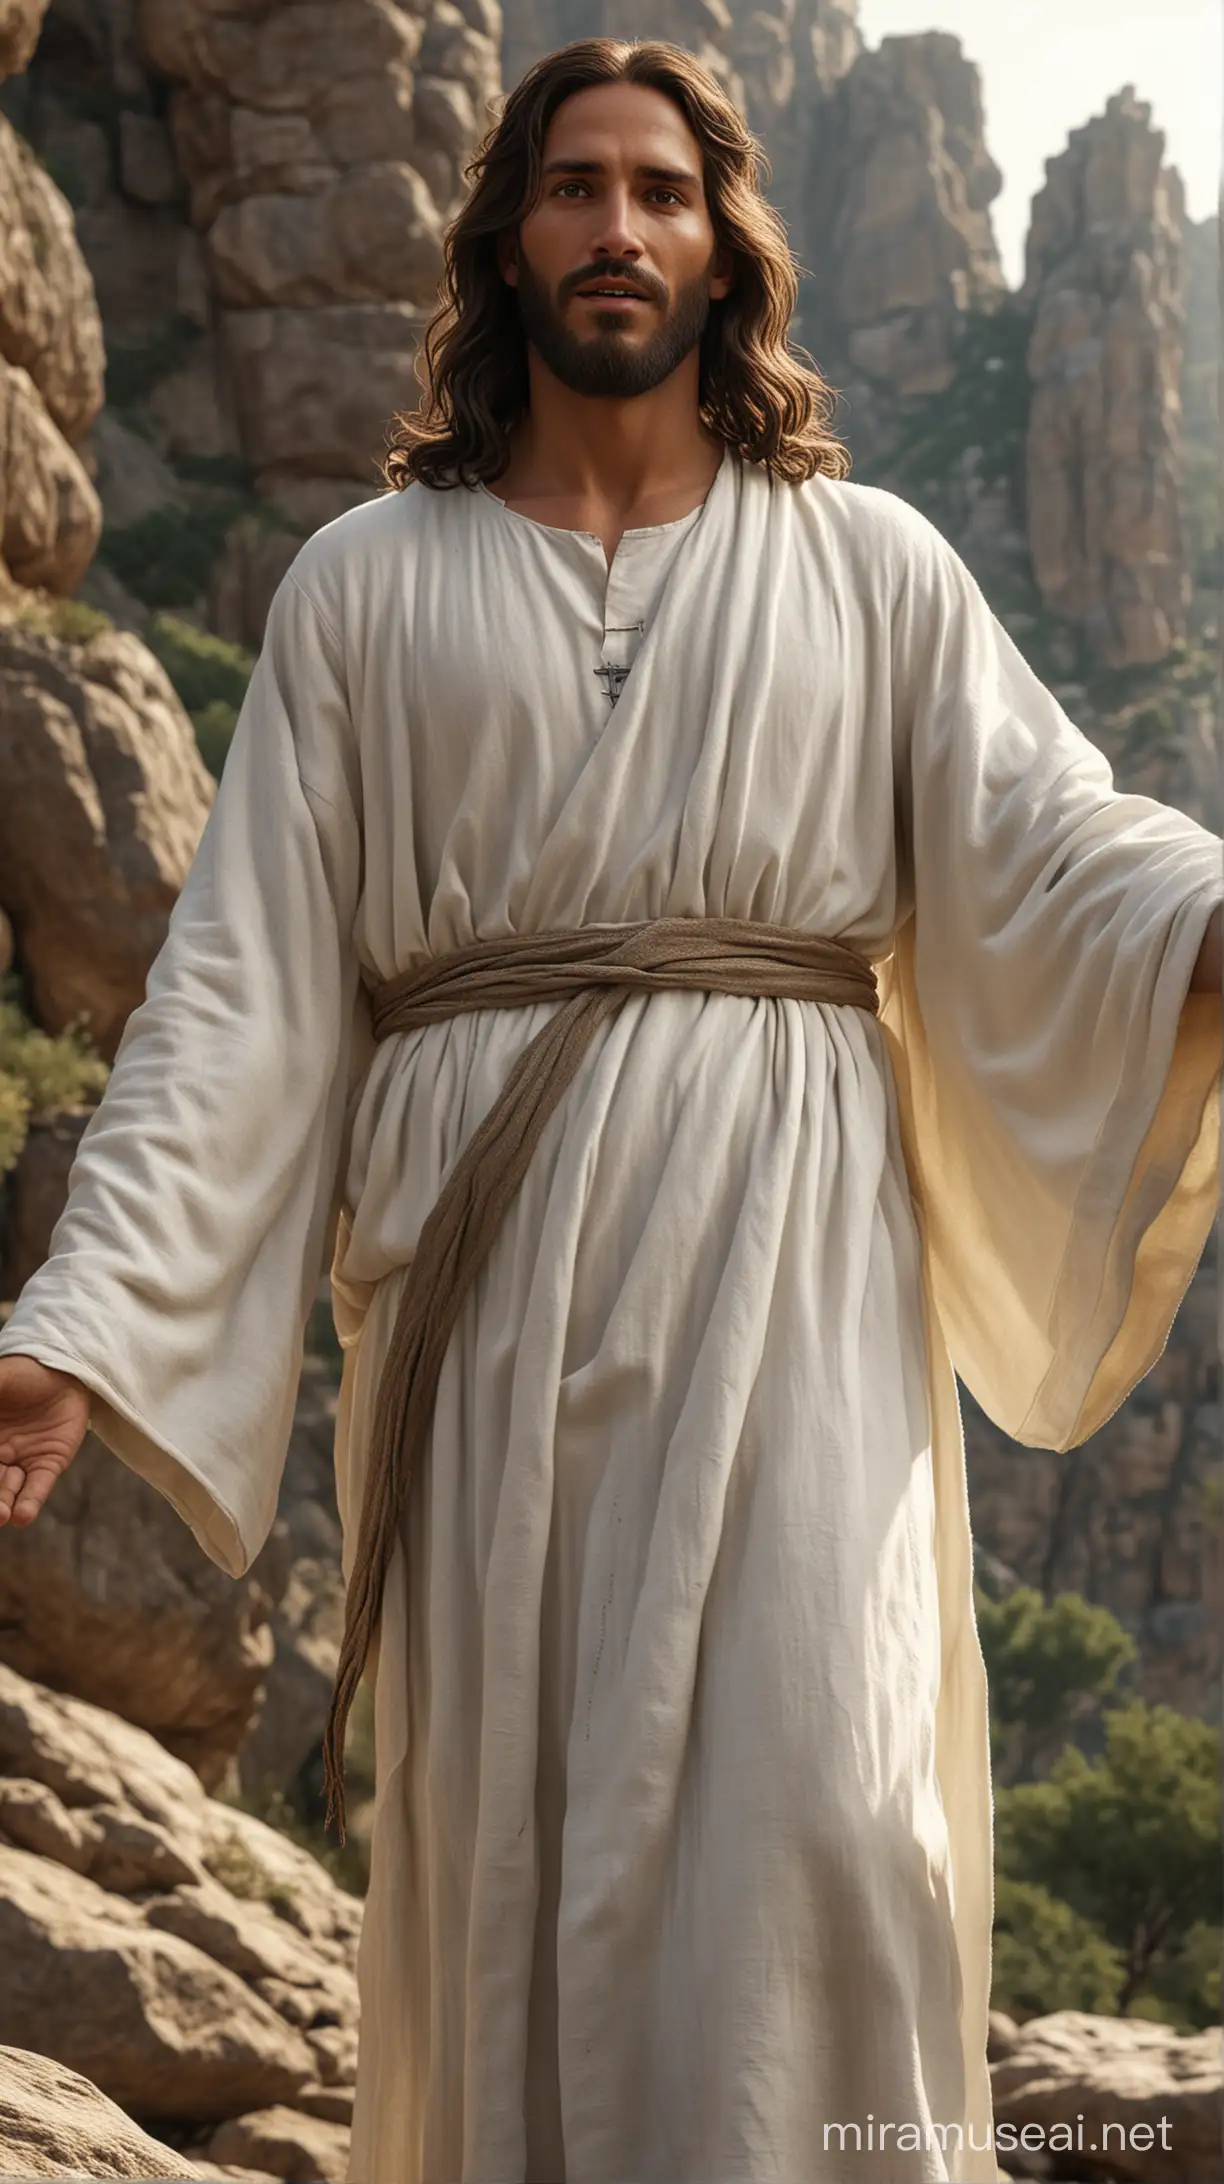 HyperRealistic Portrait of Jesus in White Holy Tunic on Rock